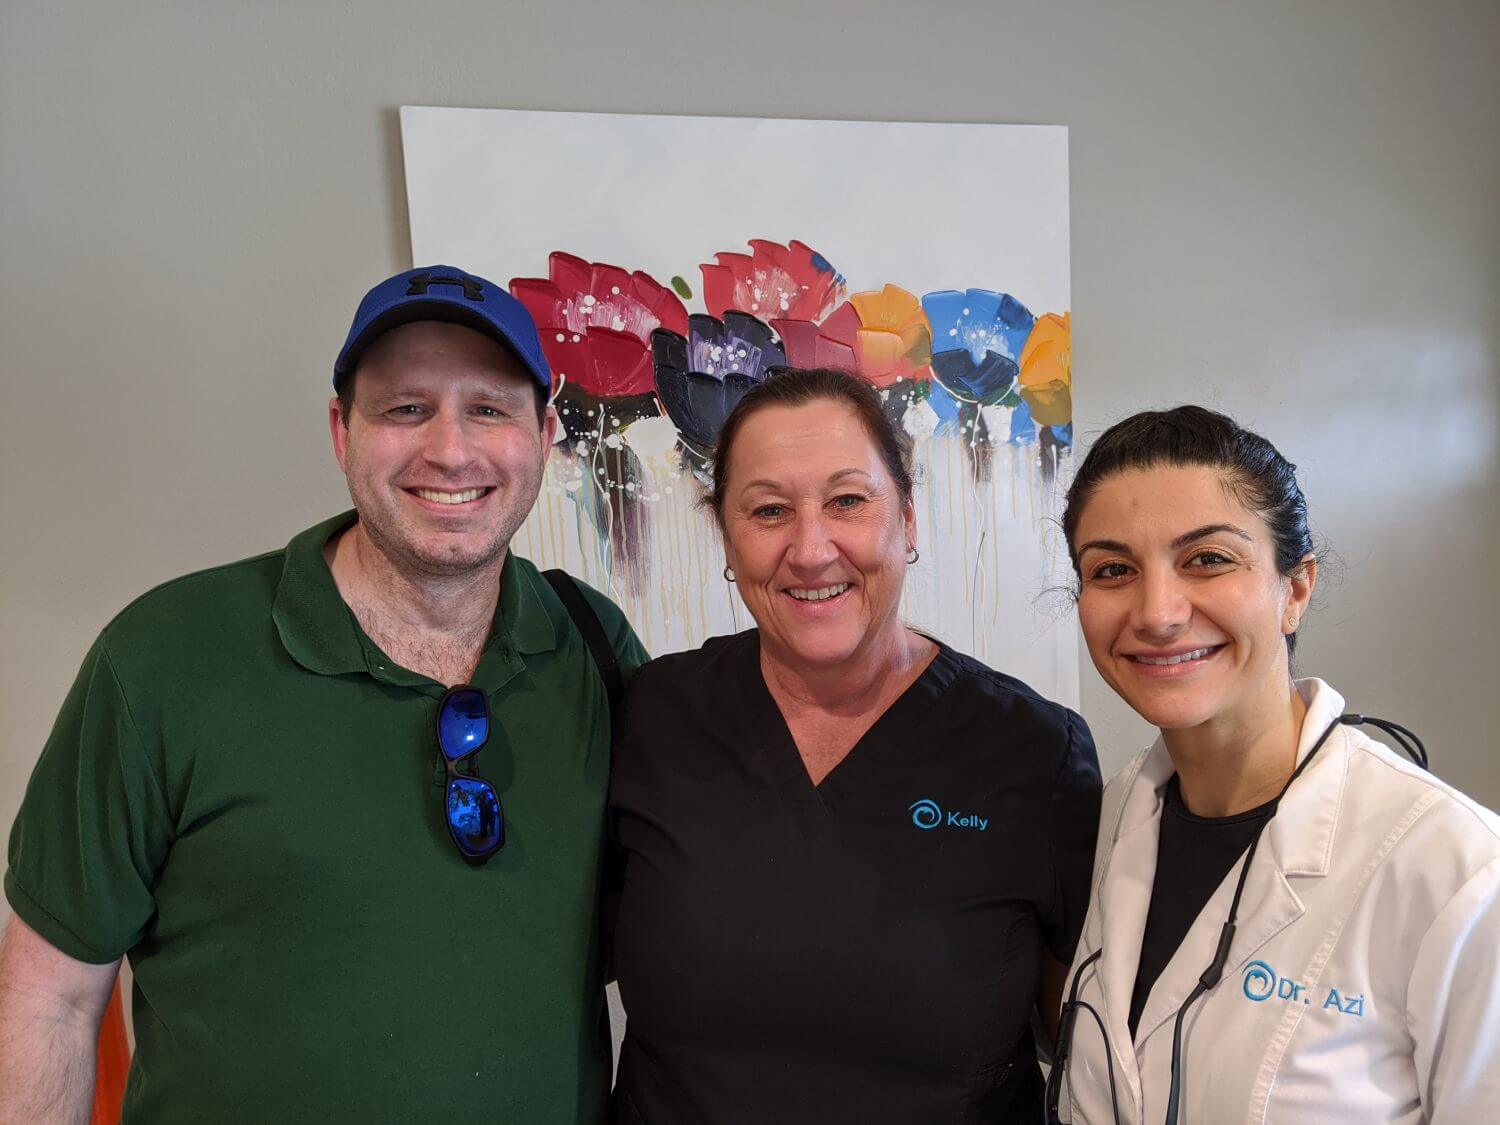 DLN Success Story – Deputy Sheriff Receives a New Smile